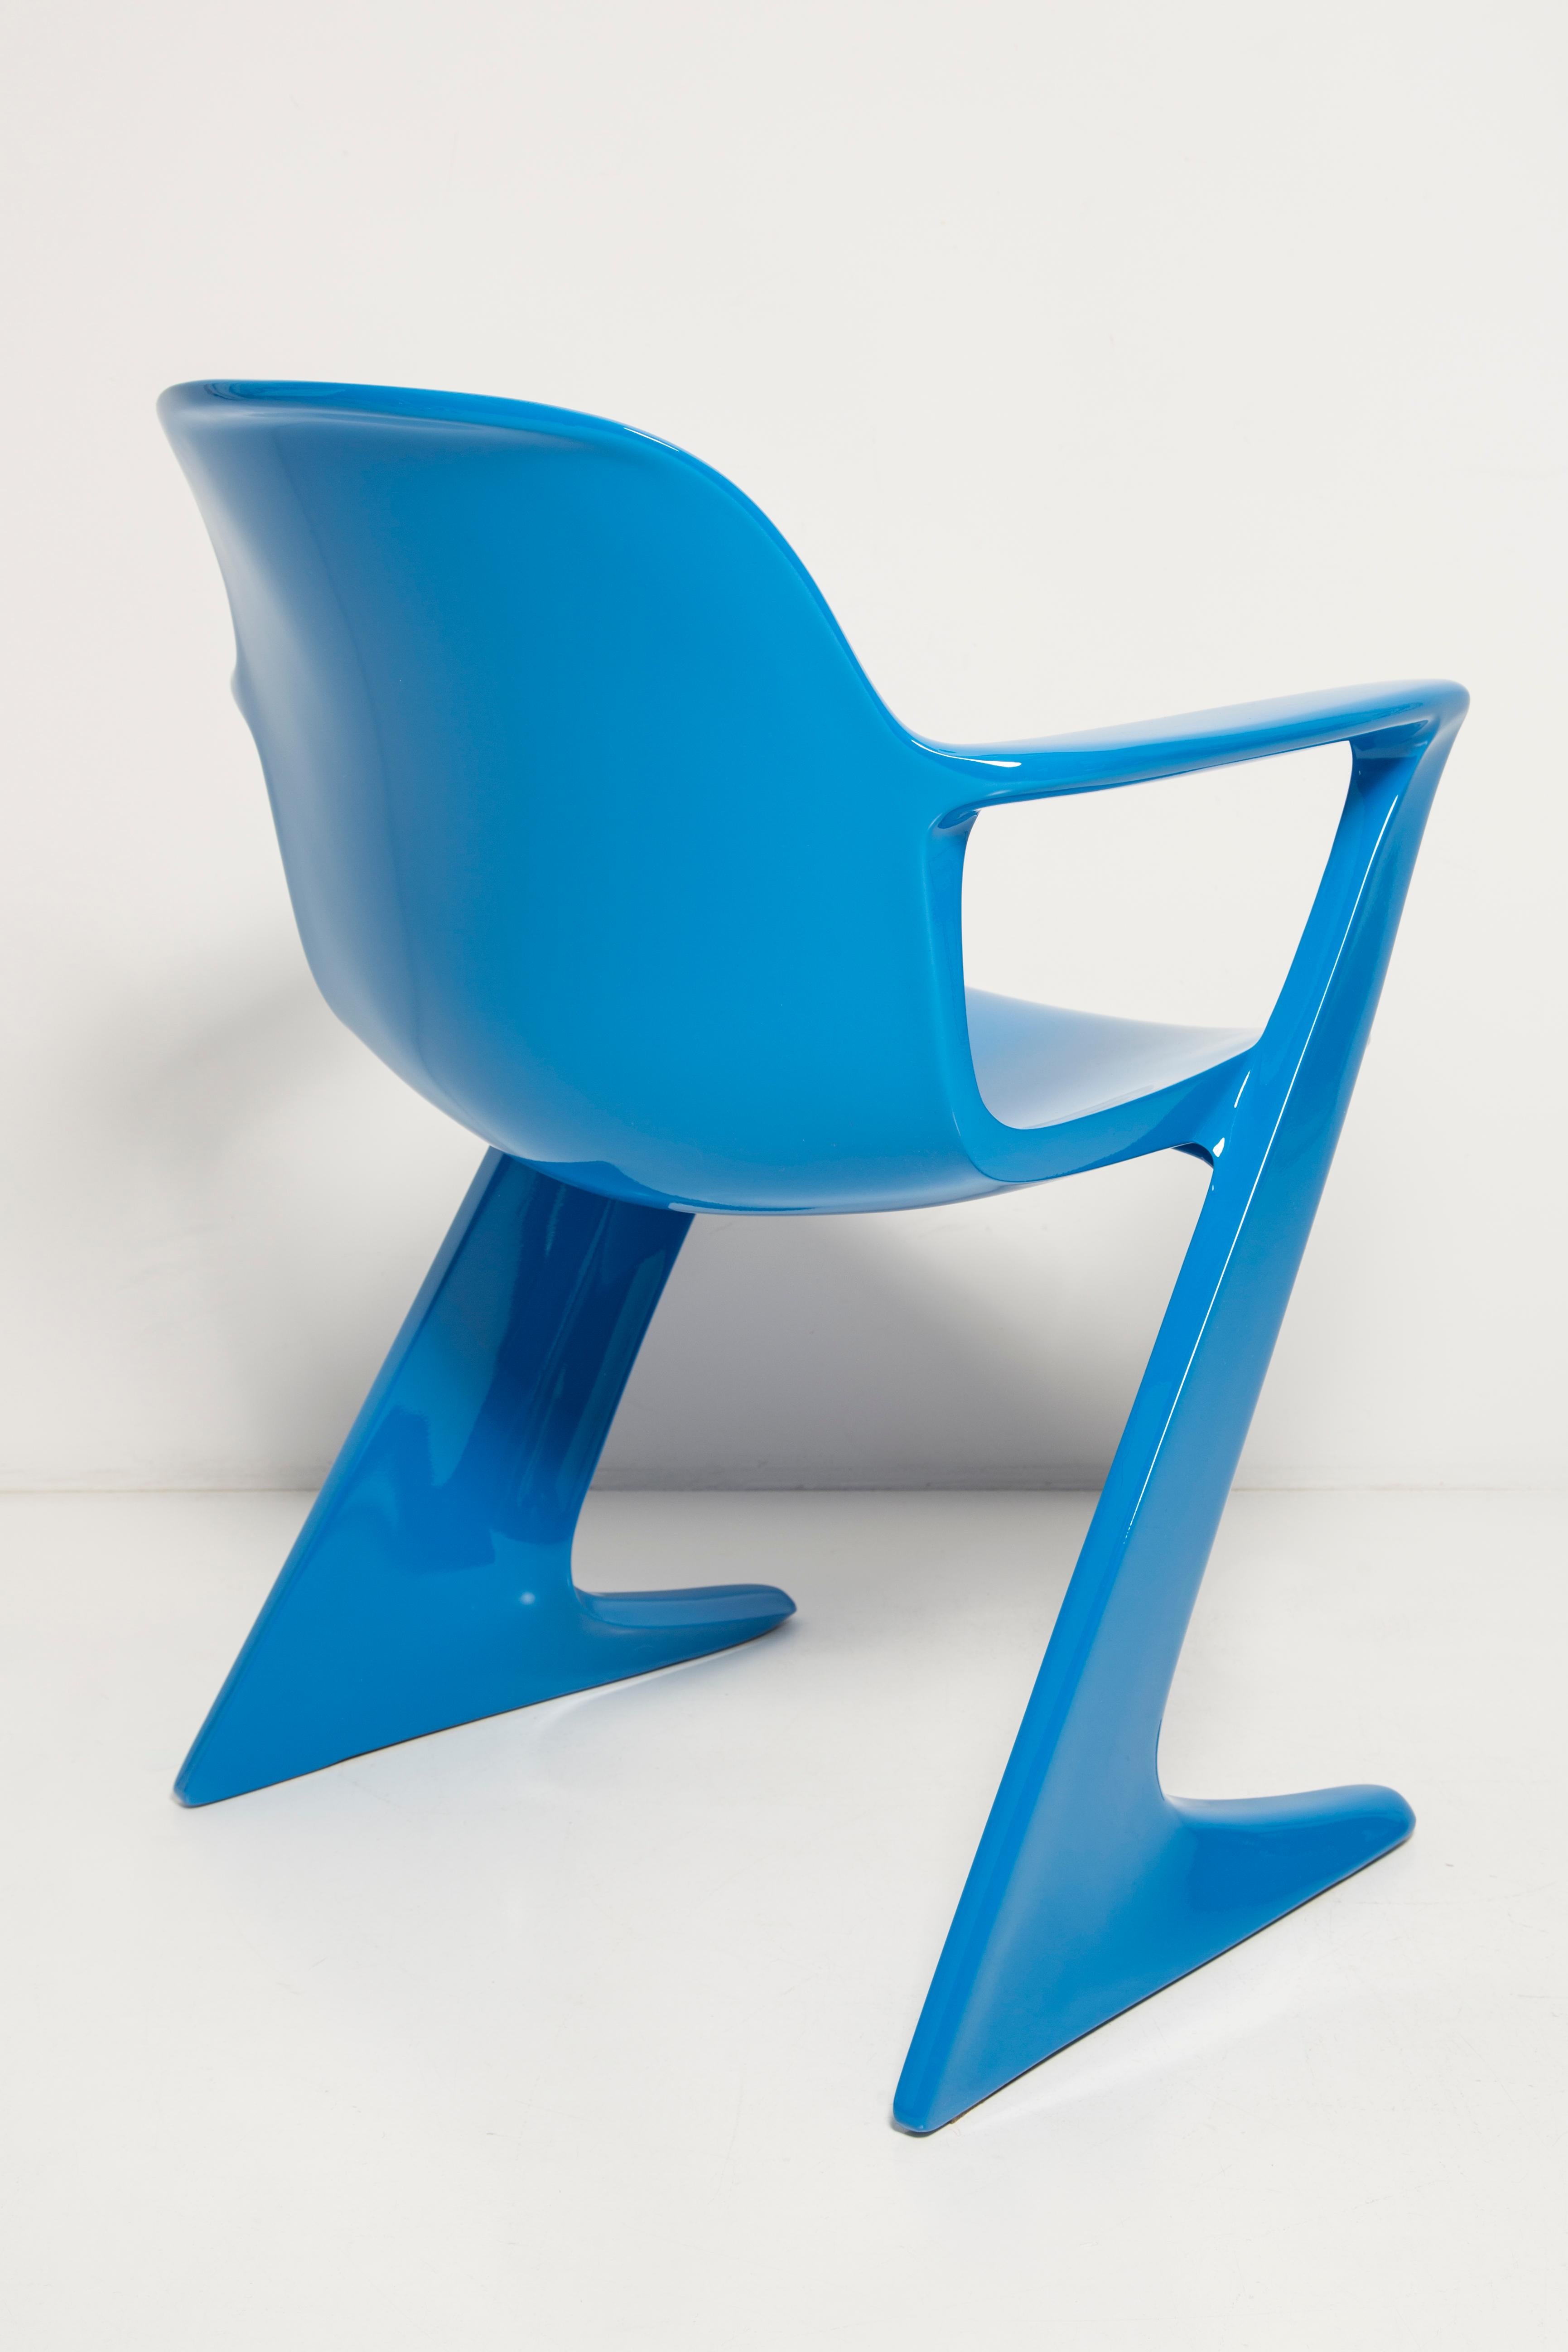 Set of Two Blue Kangaroo Chairs Designed by Ernst Moeckl, Germany, 1968 For Sale 5